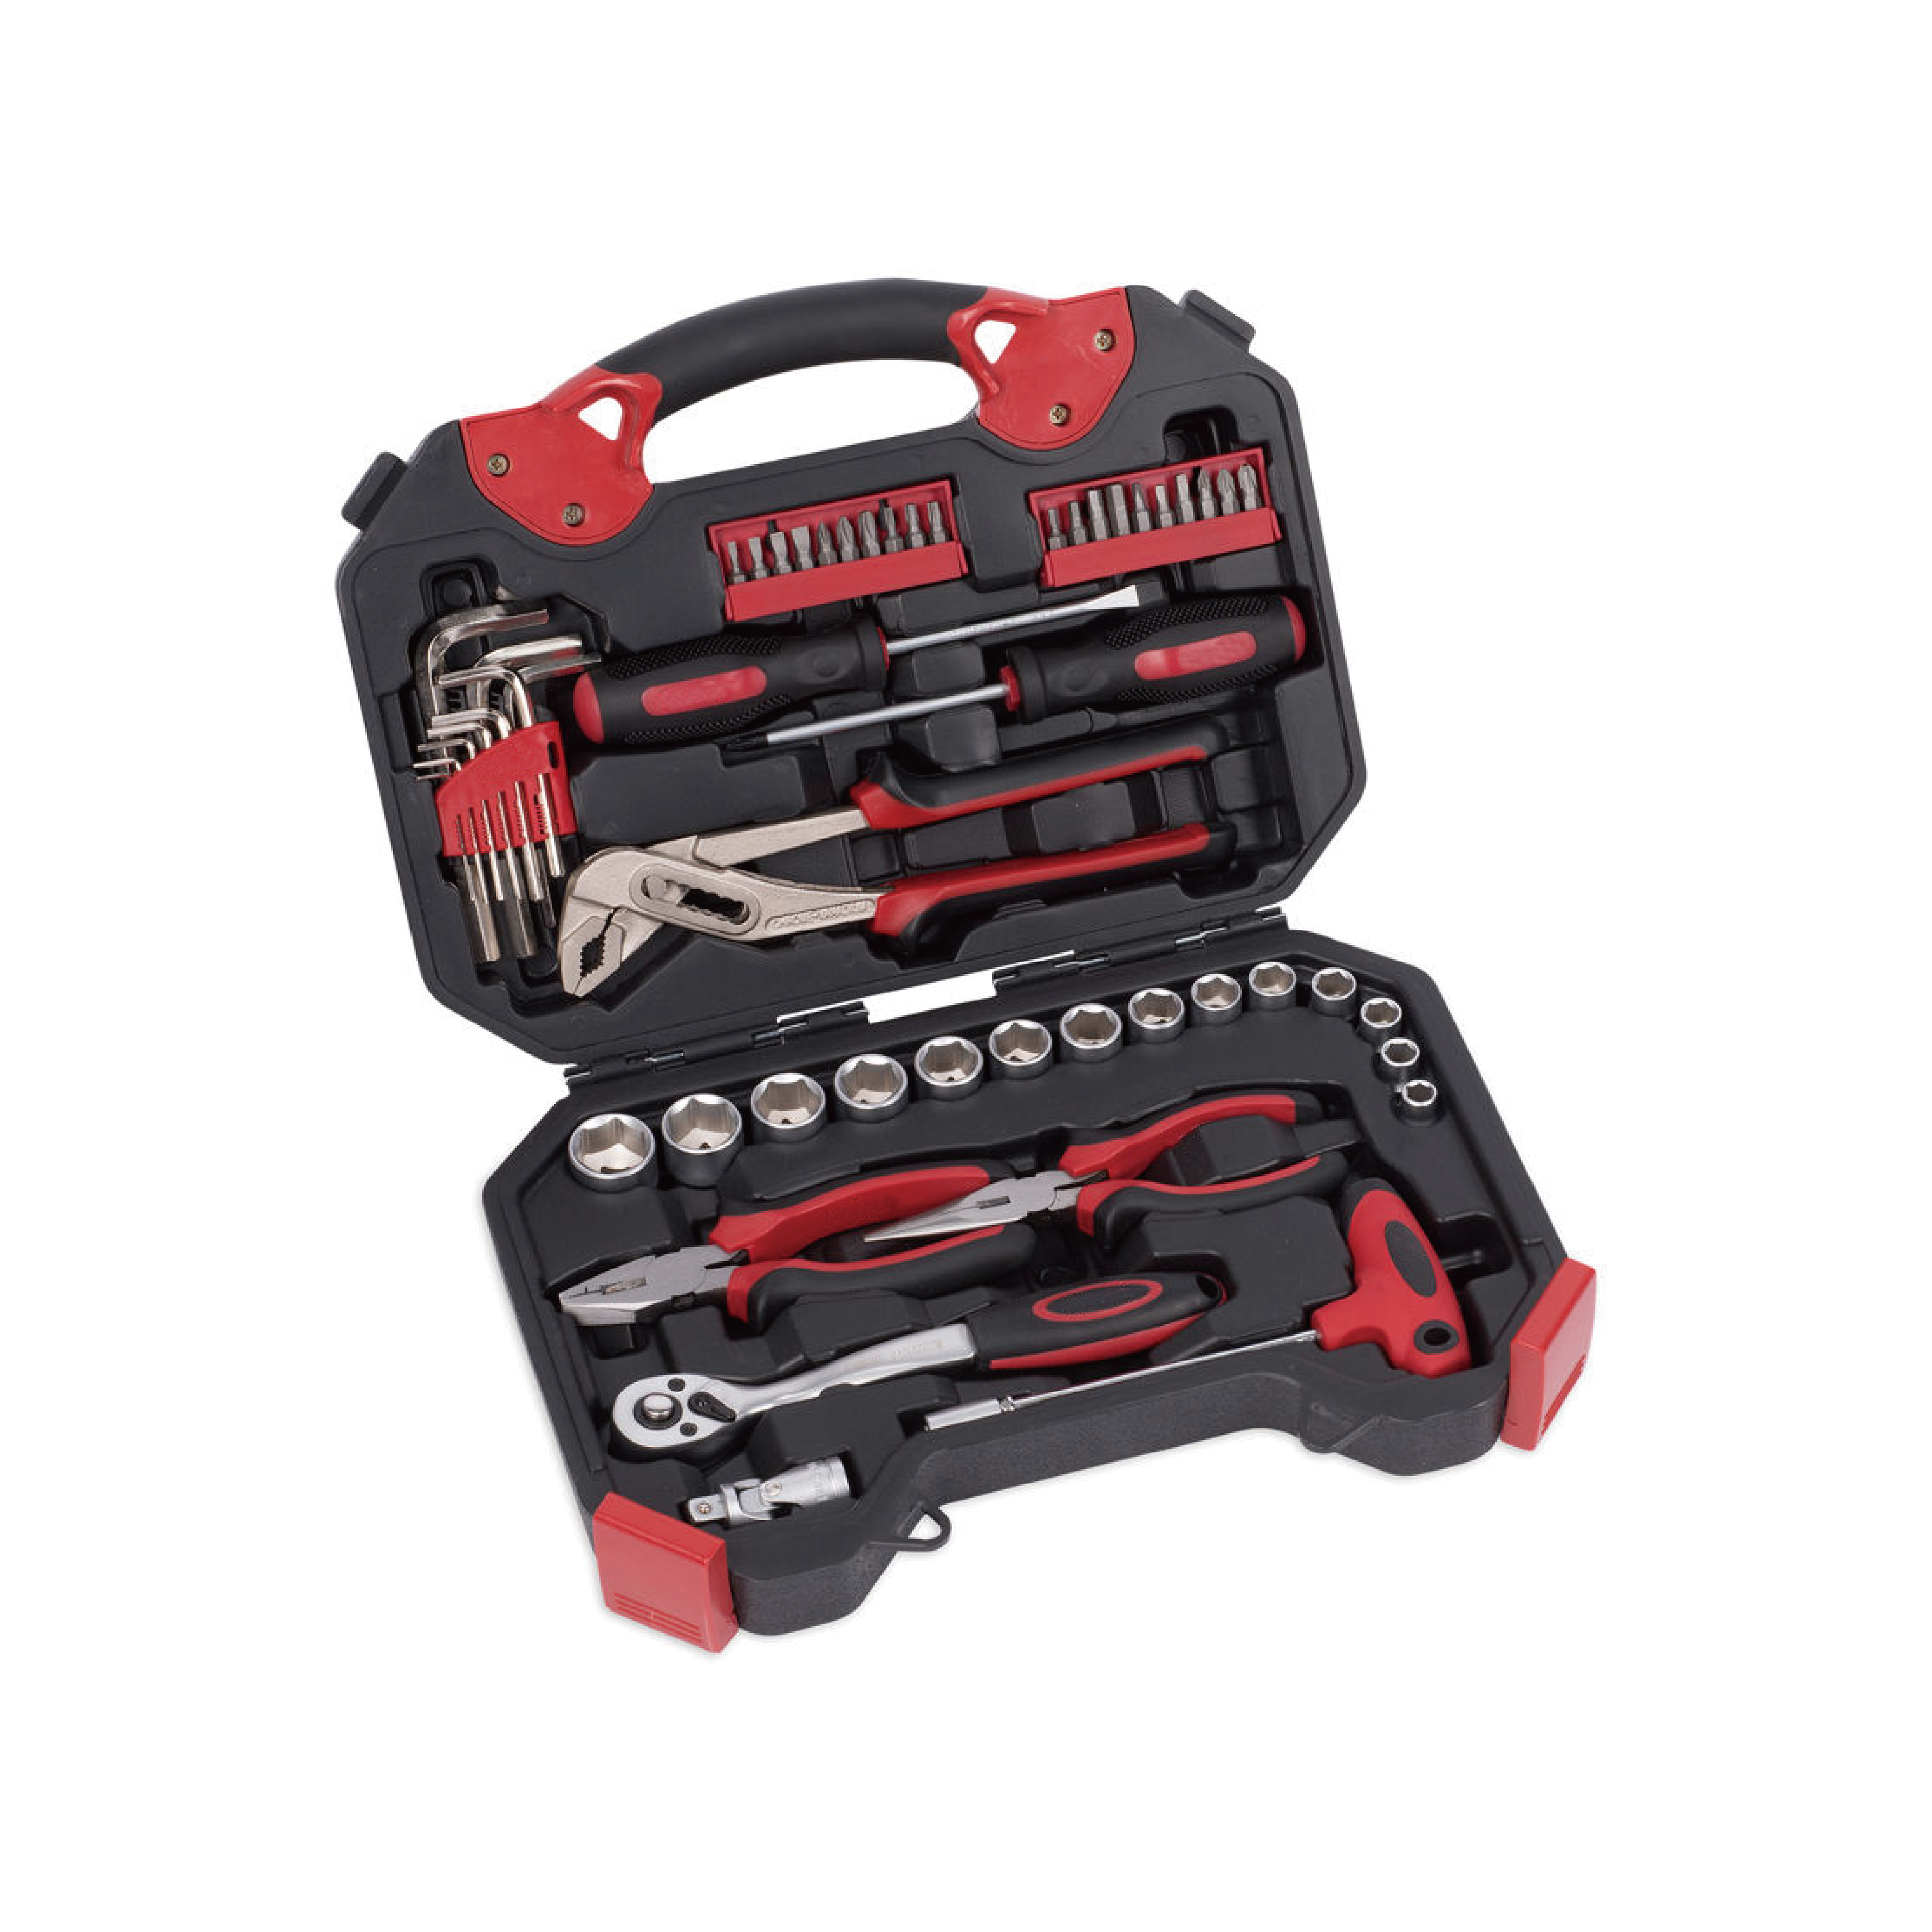 PriceList for Cordless Drill Set - 52PCS Tool Set in Blow Case all Carbon Steel – MACHINERY TOOLS